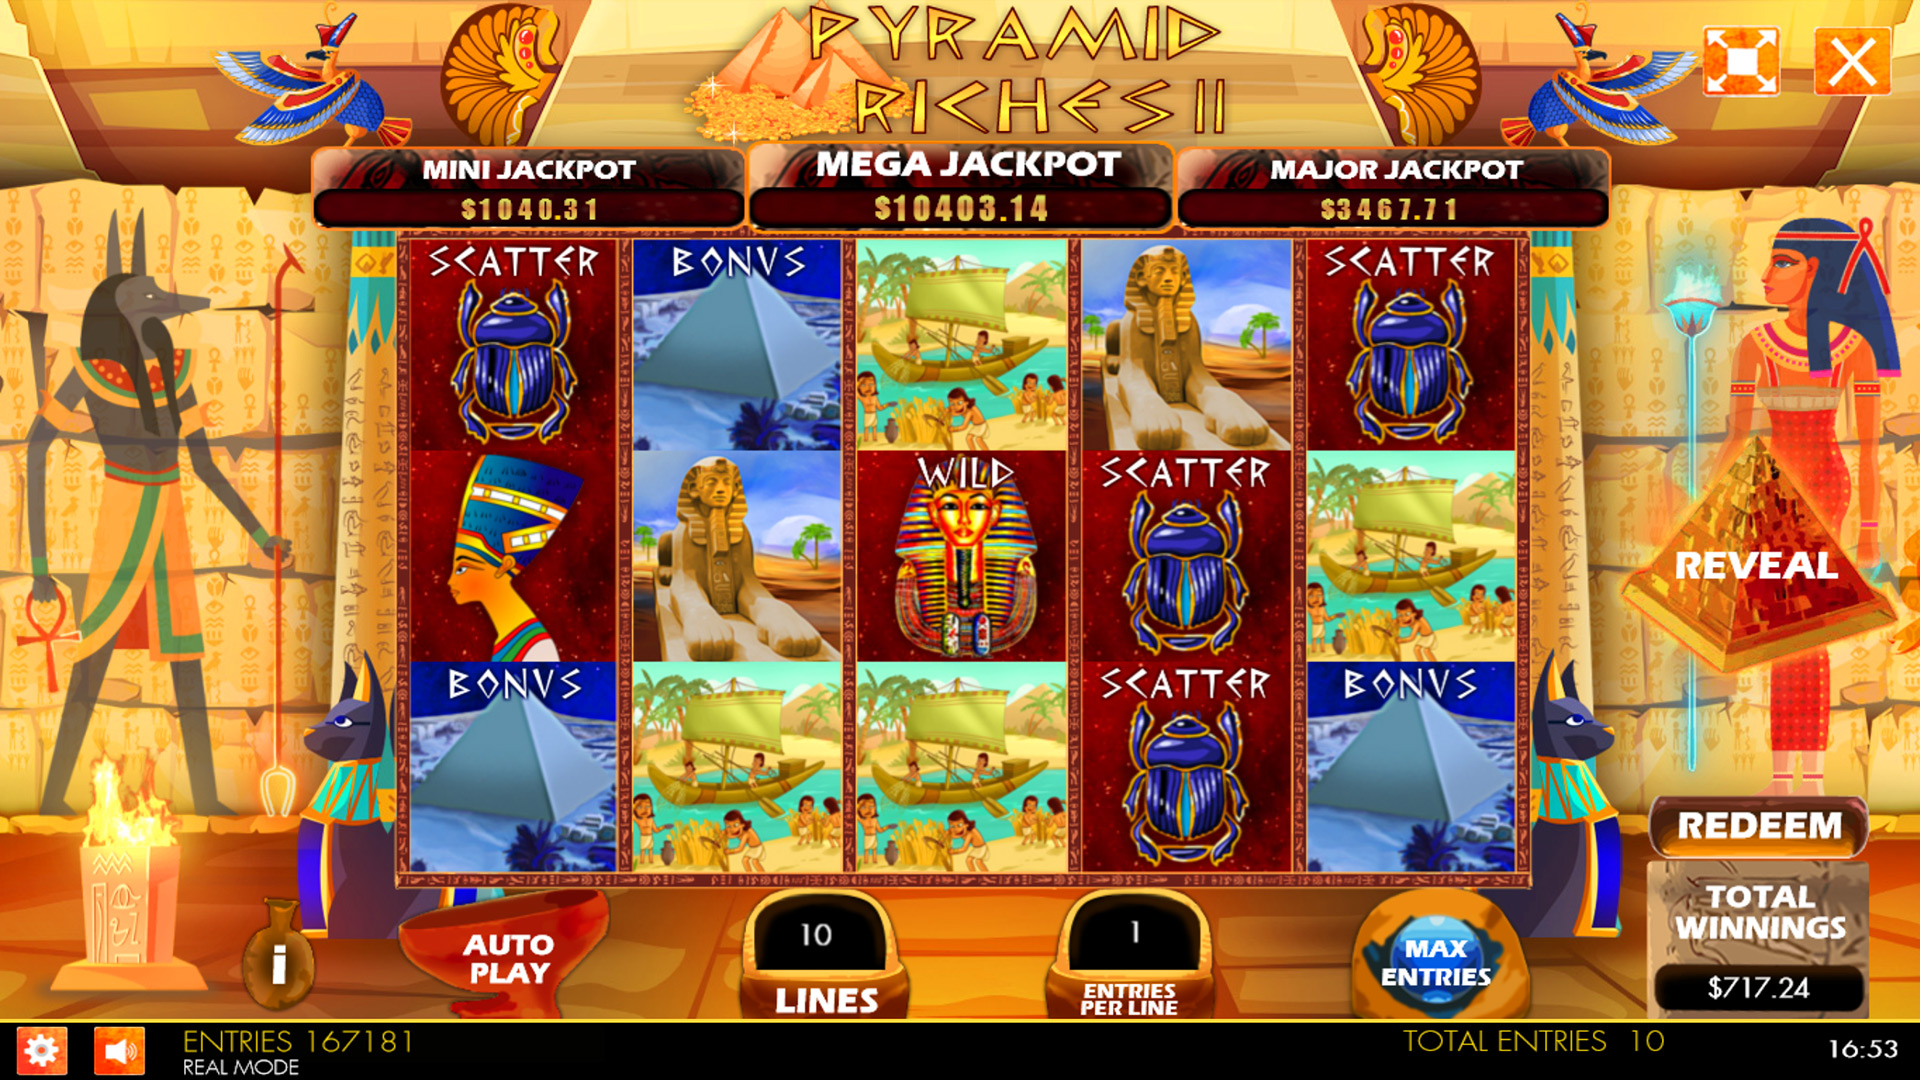 Pyramid Riches II HTML5 Mobile and PC Preview Pic Main Screen 1